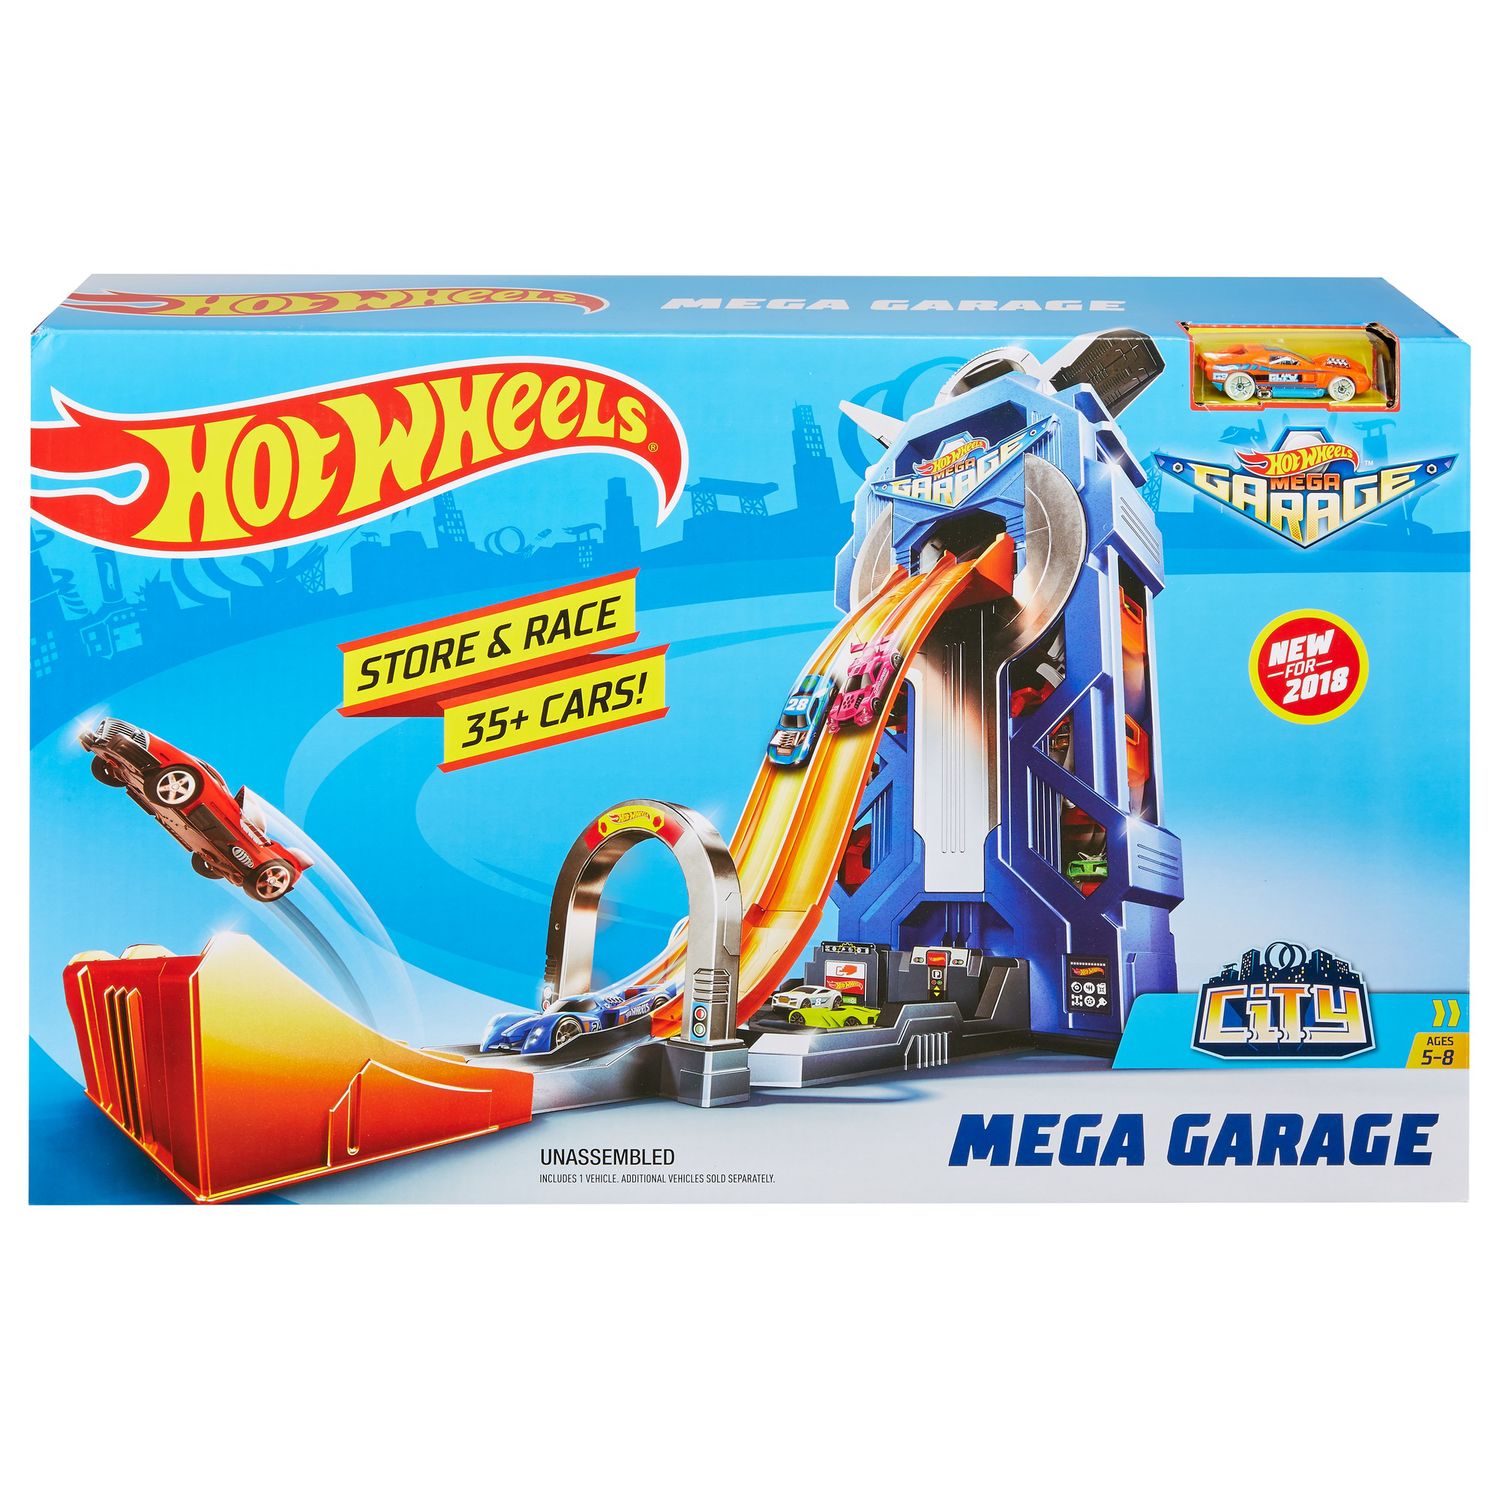 hot wheels at kohl's Shop Today's Best Online Discounts & Sa